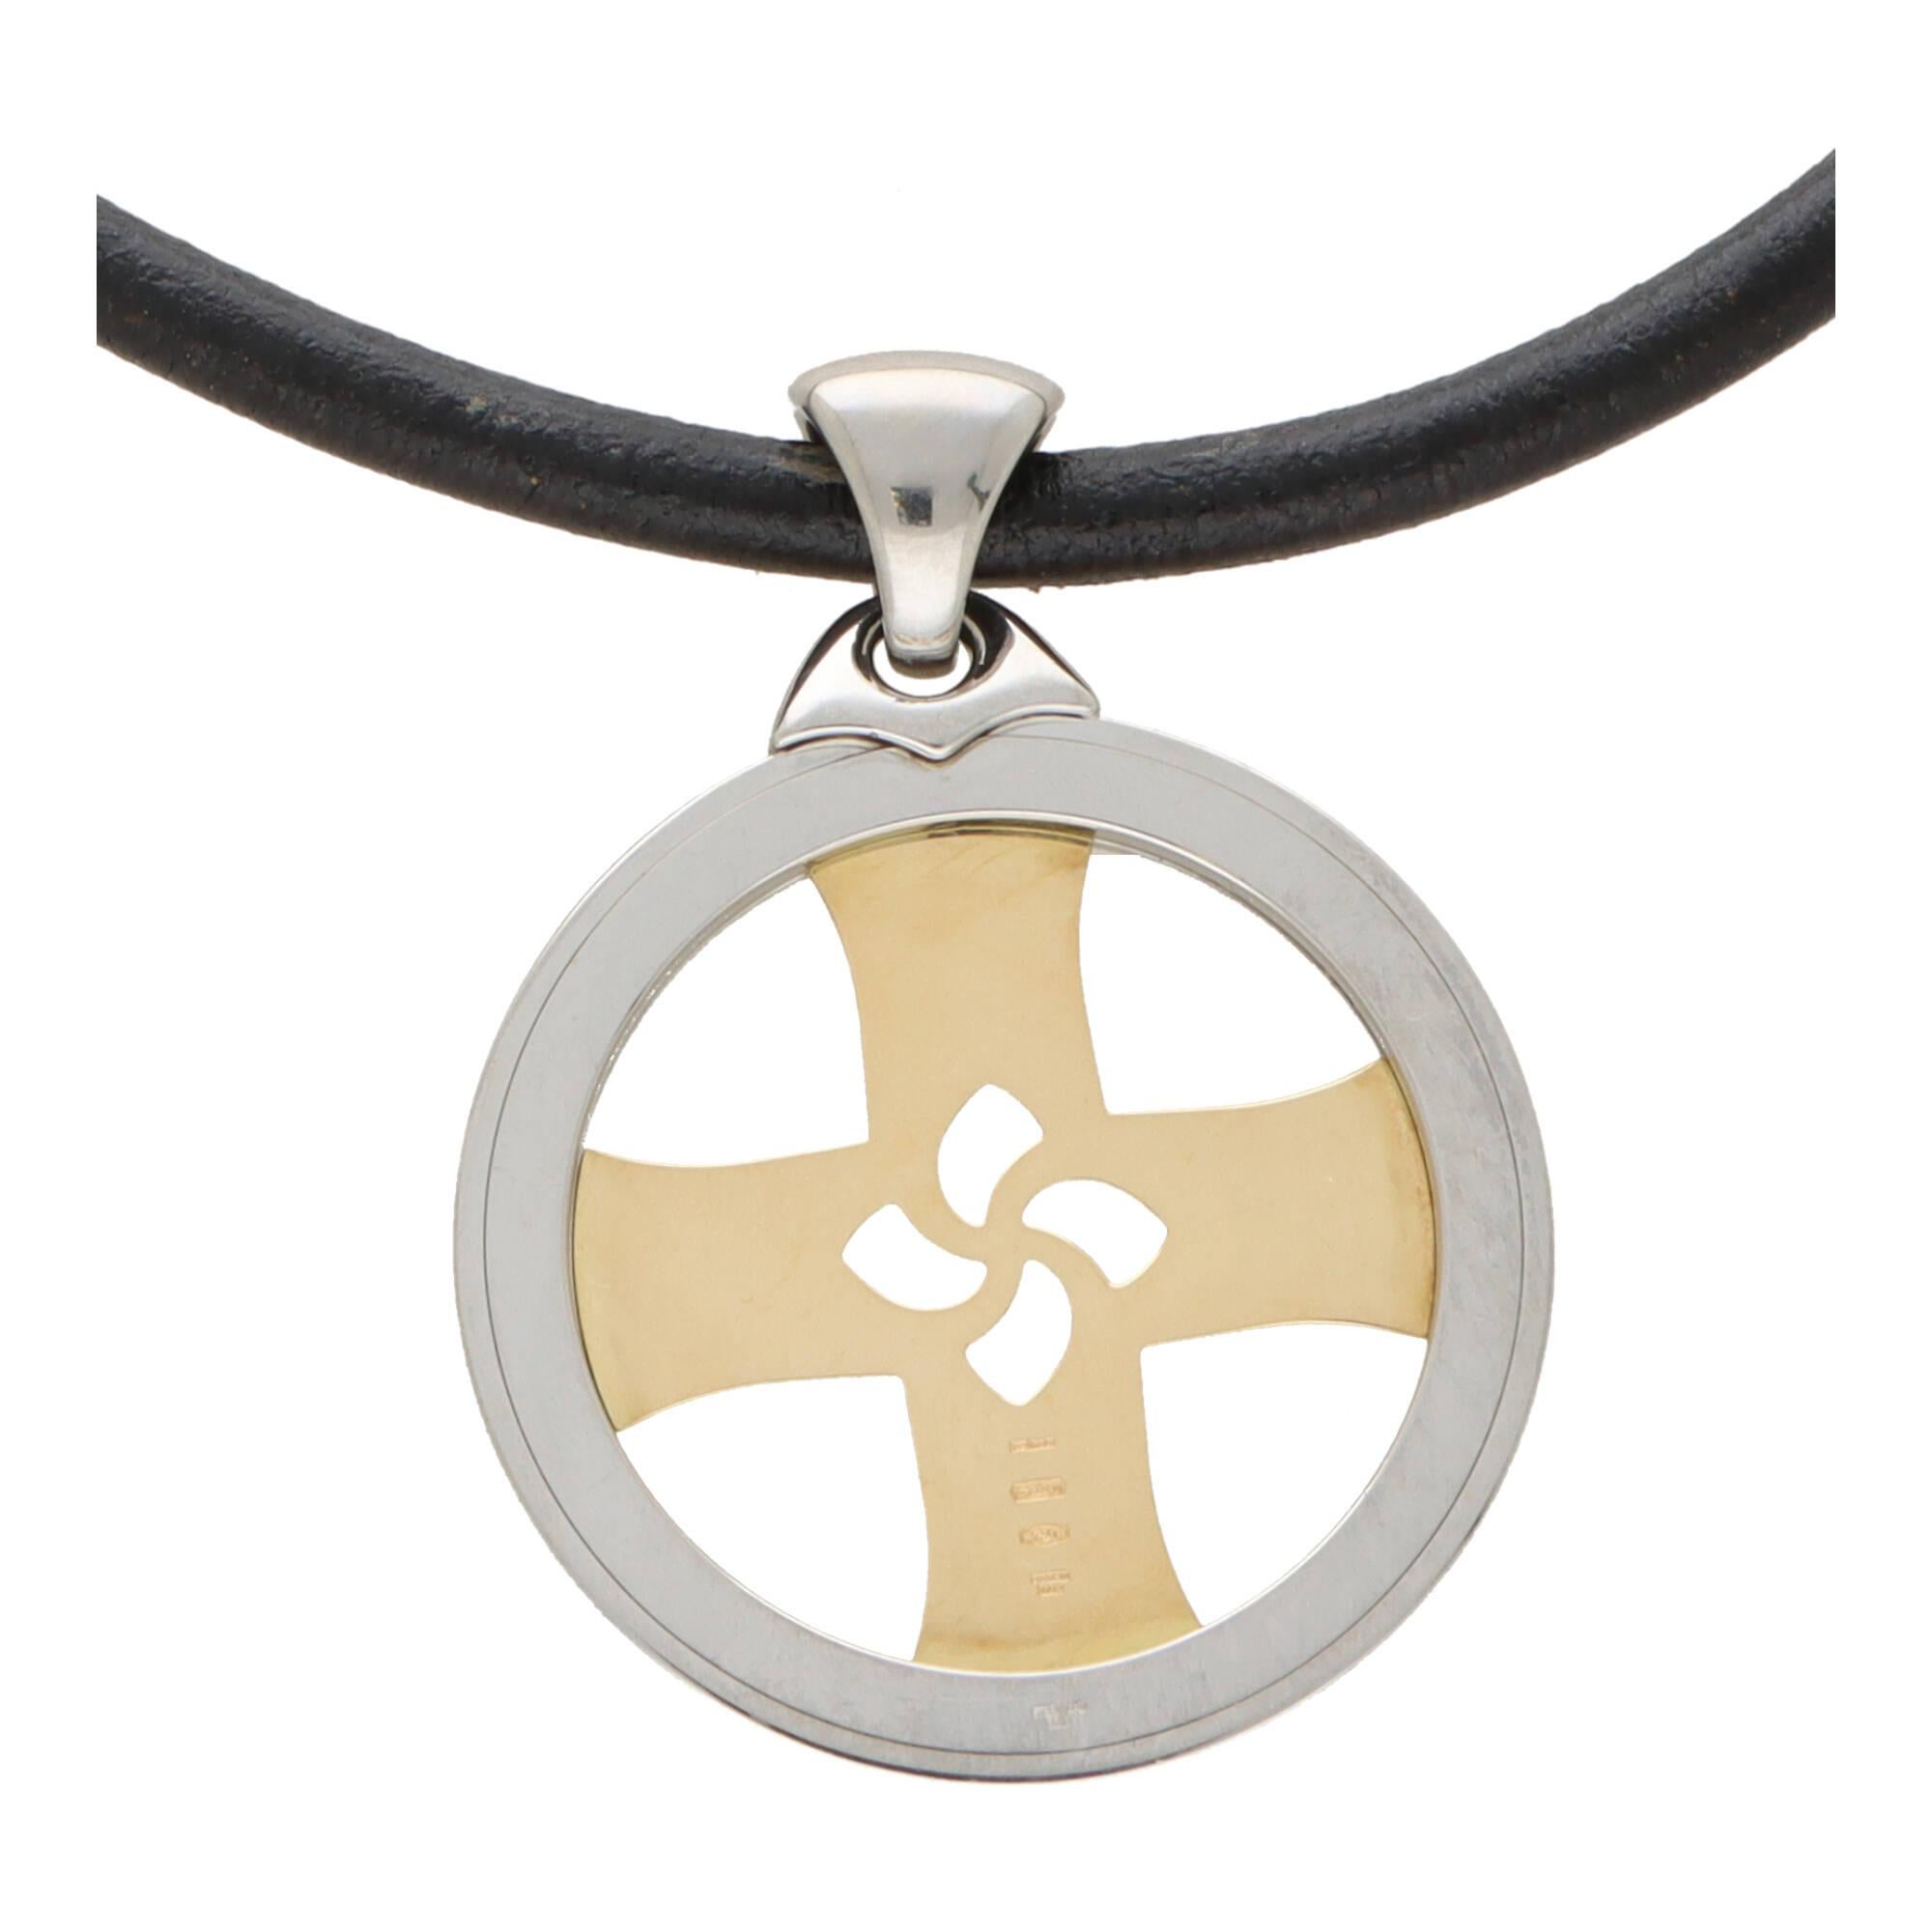 Modern Vintage Bvlgari 'Tondo' Cross Necklace Set in Yellow Gold and Stainless Steel